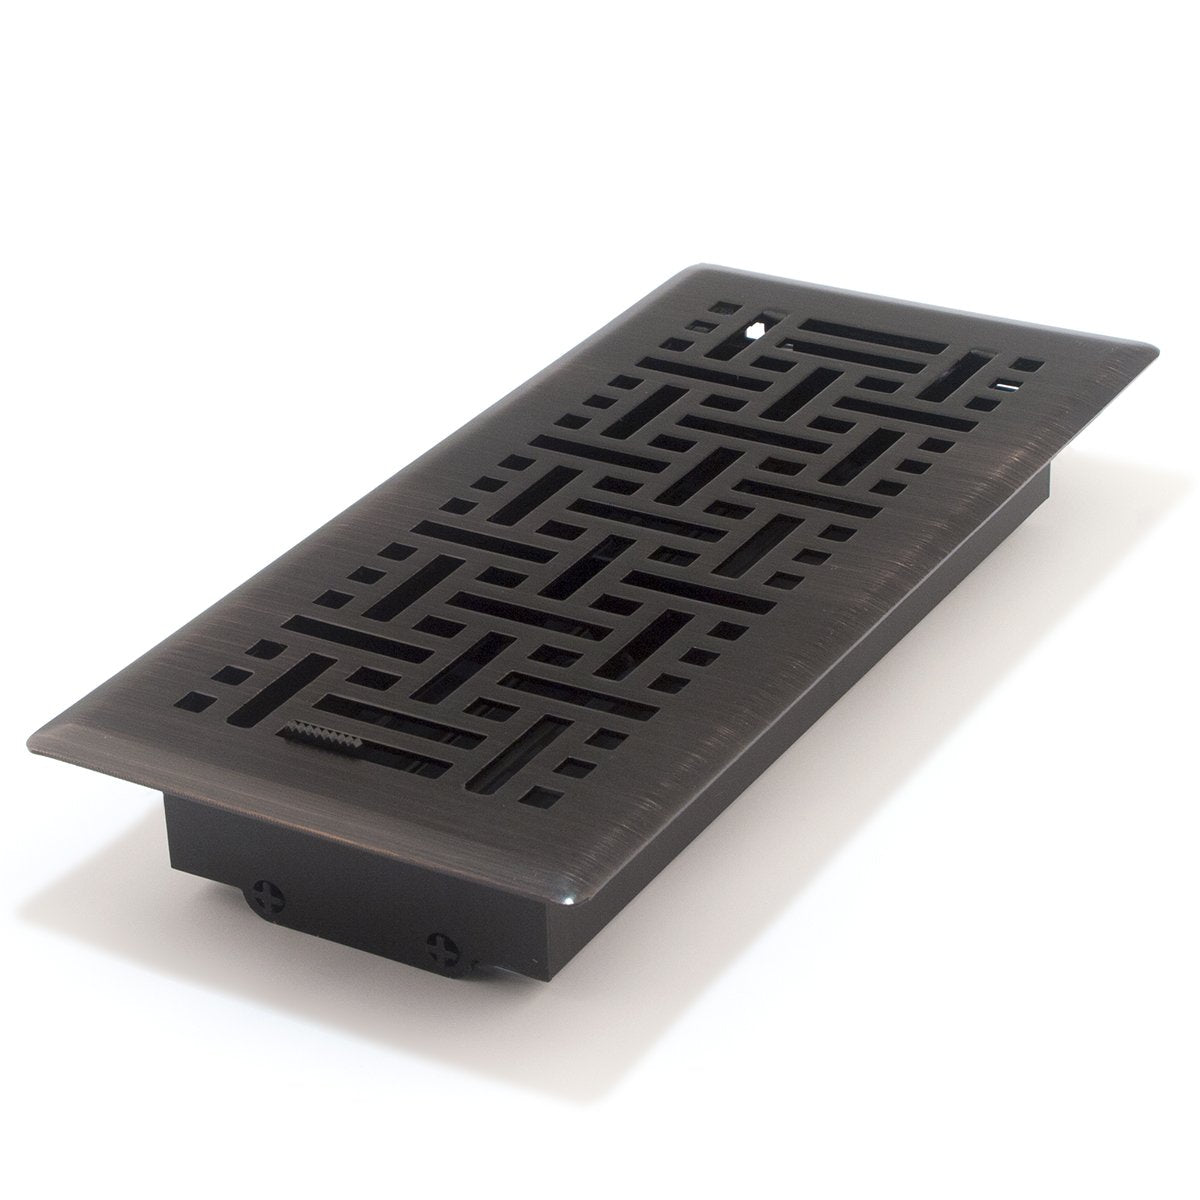 2&quot; X 10&quot; Modern Victorian Floor Register Grille With Dampers - Decorative Grate - HVAC Vent Duct Cover - Matte Black